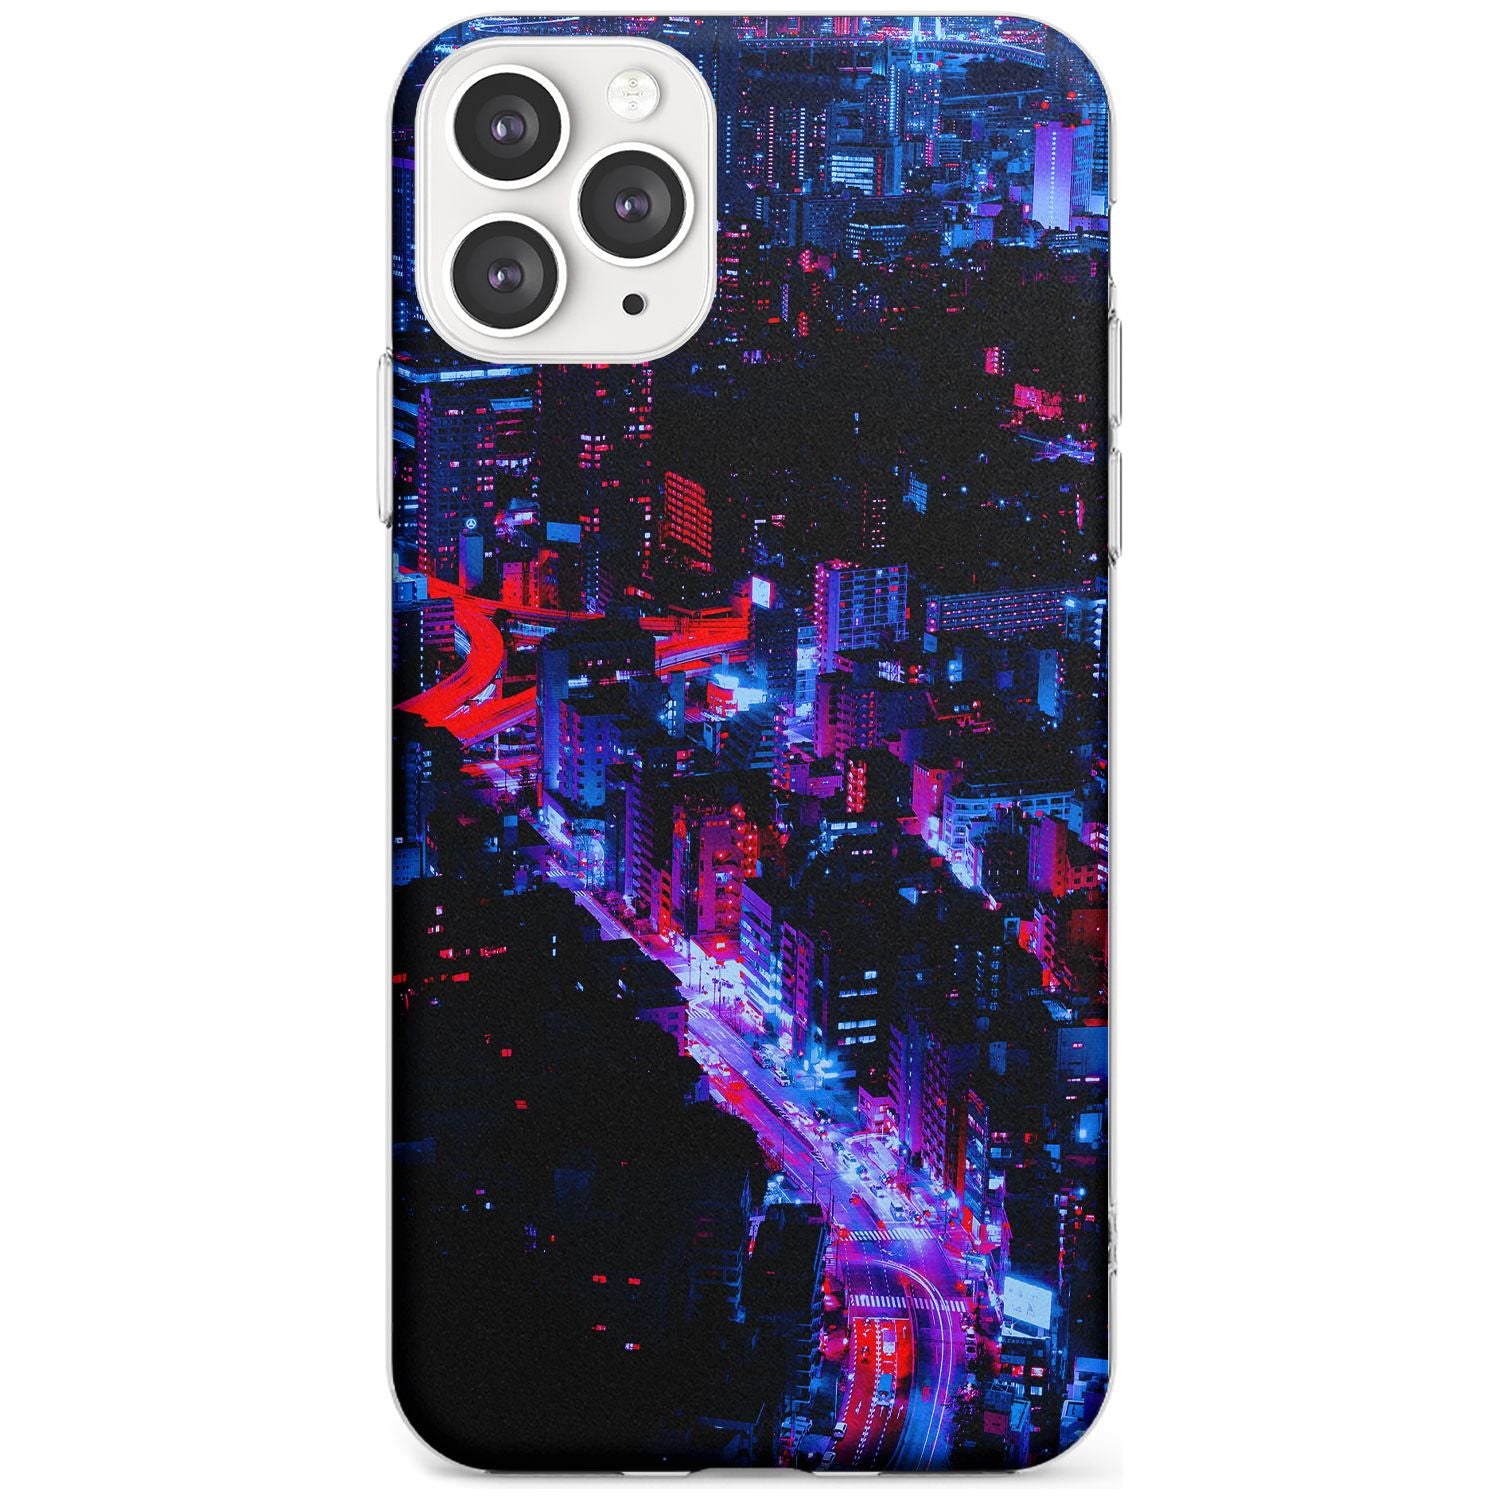 Arial City View - Neon Cities Photographs Slim TPU Phone Case for iPhone 11 Pro Max